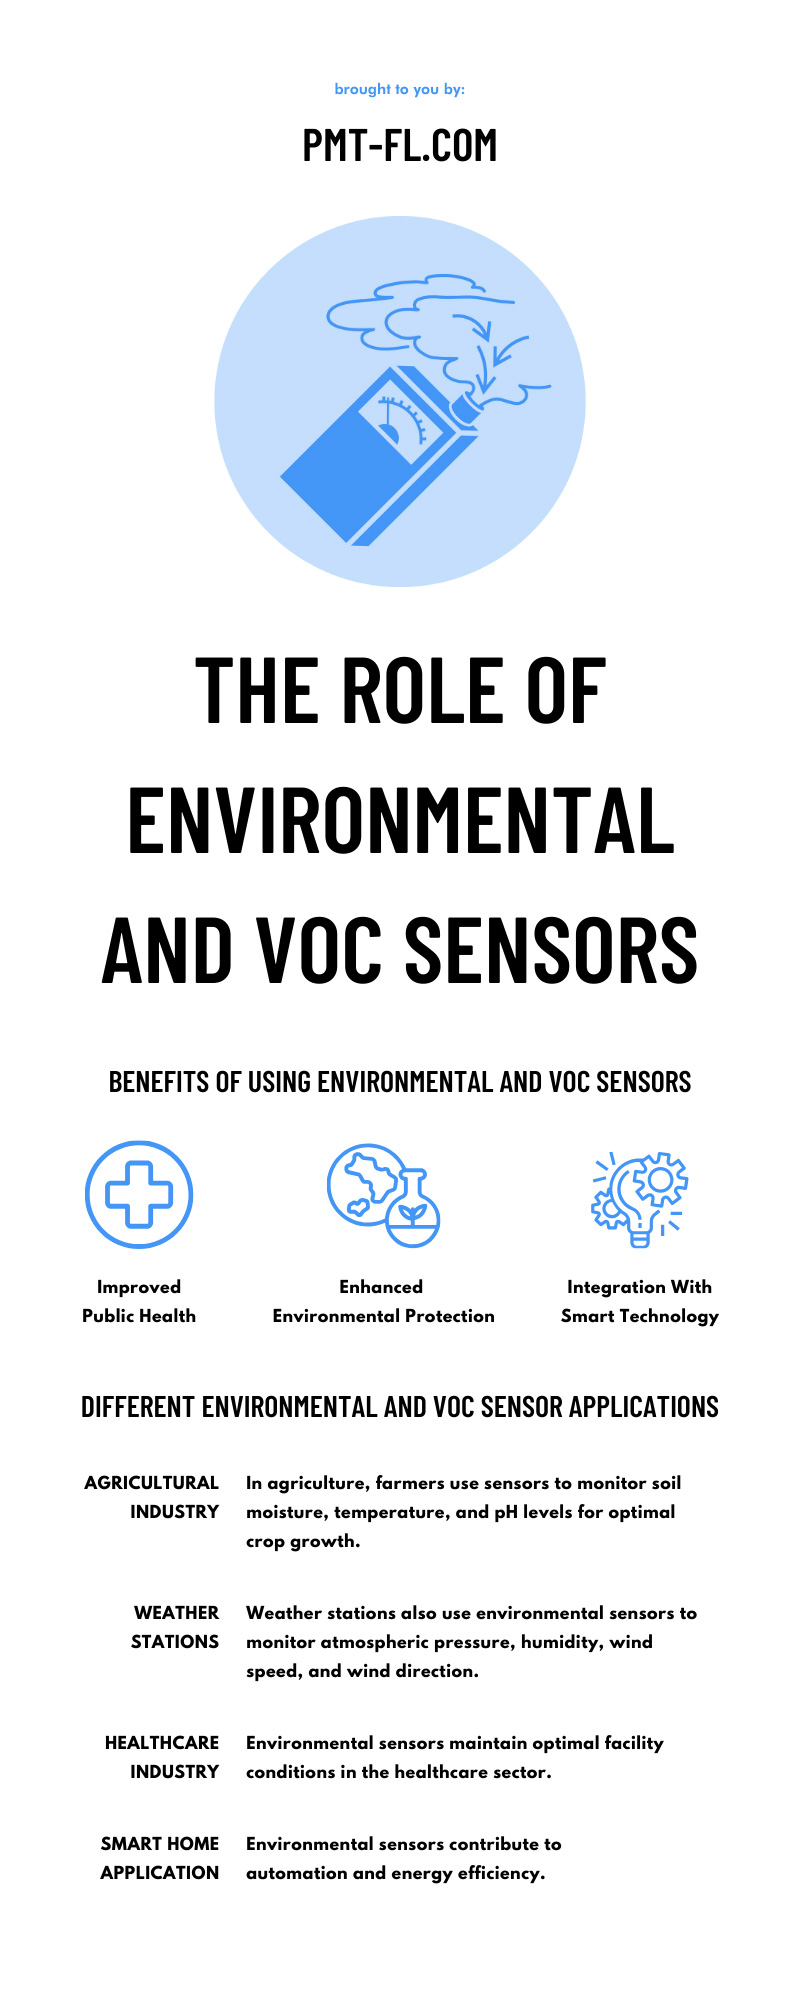 The Role of Environmental and VOC Sensors